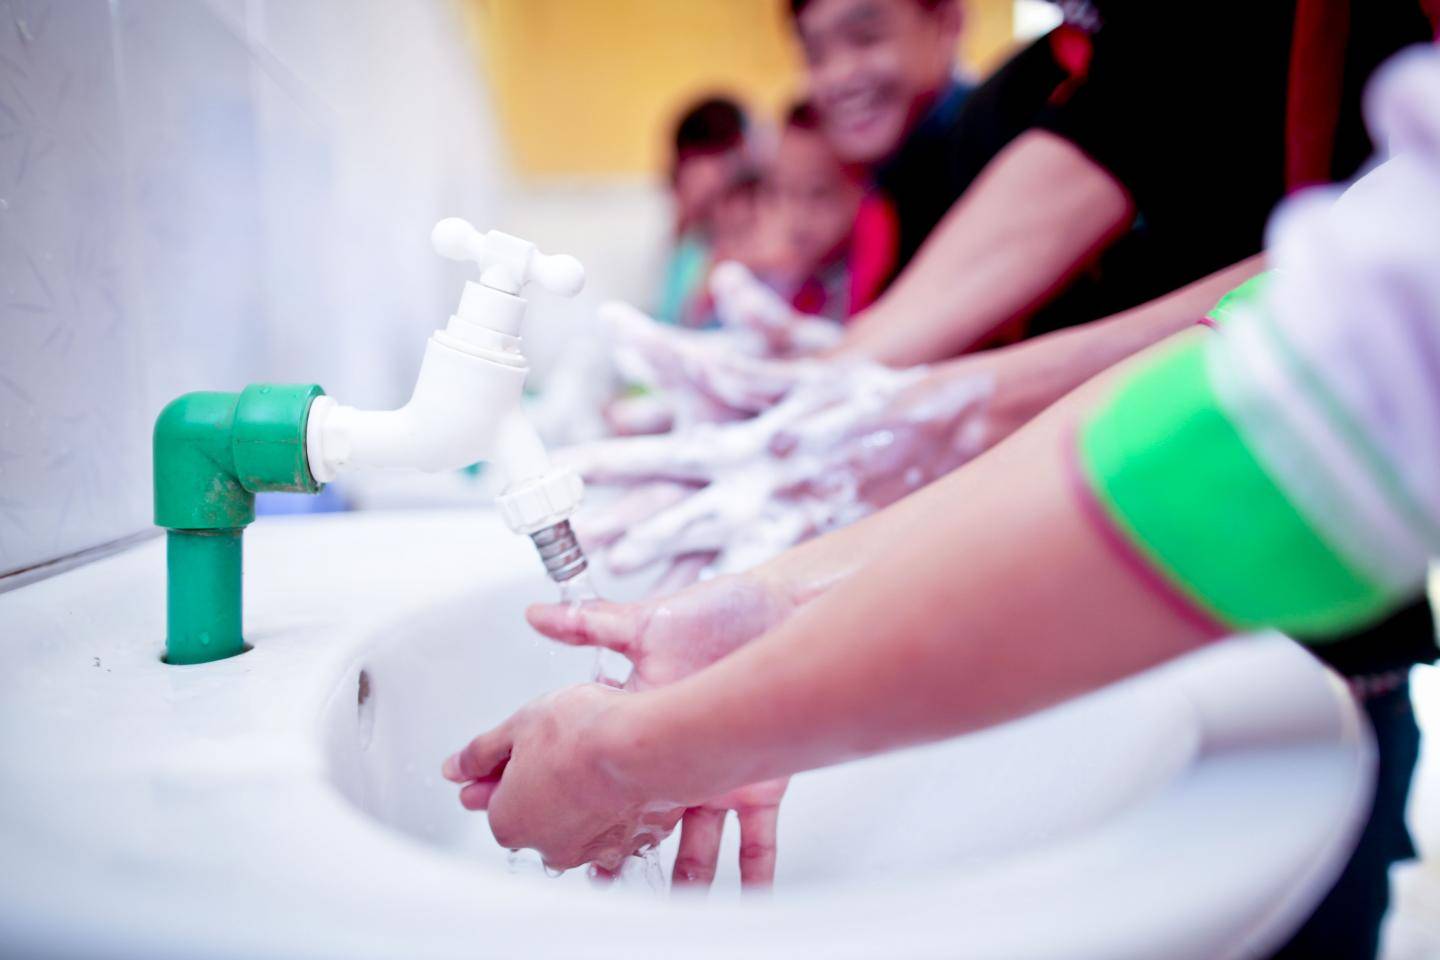  Everything you need to know about washing your hands to protect against the virus